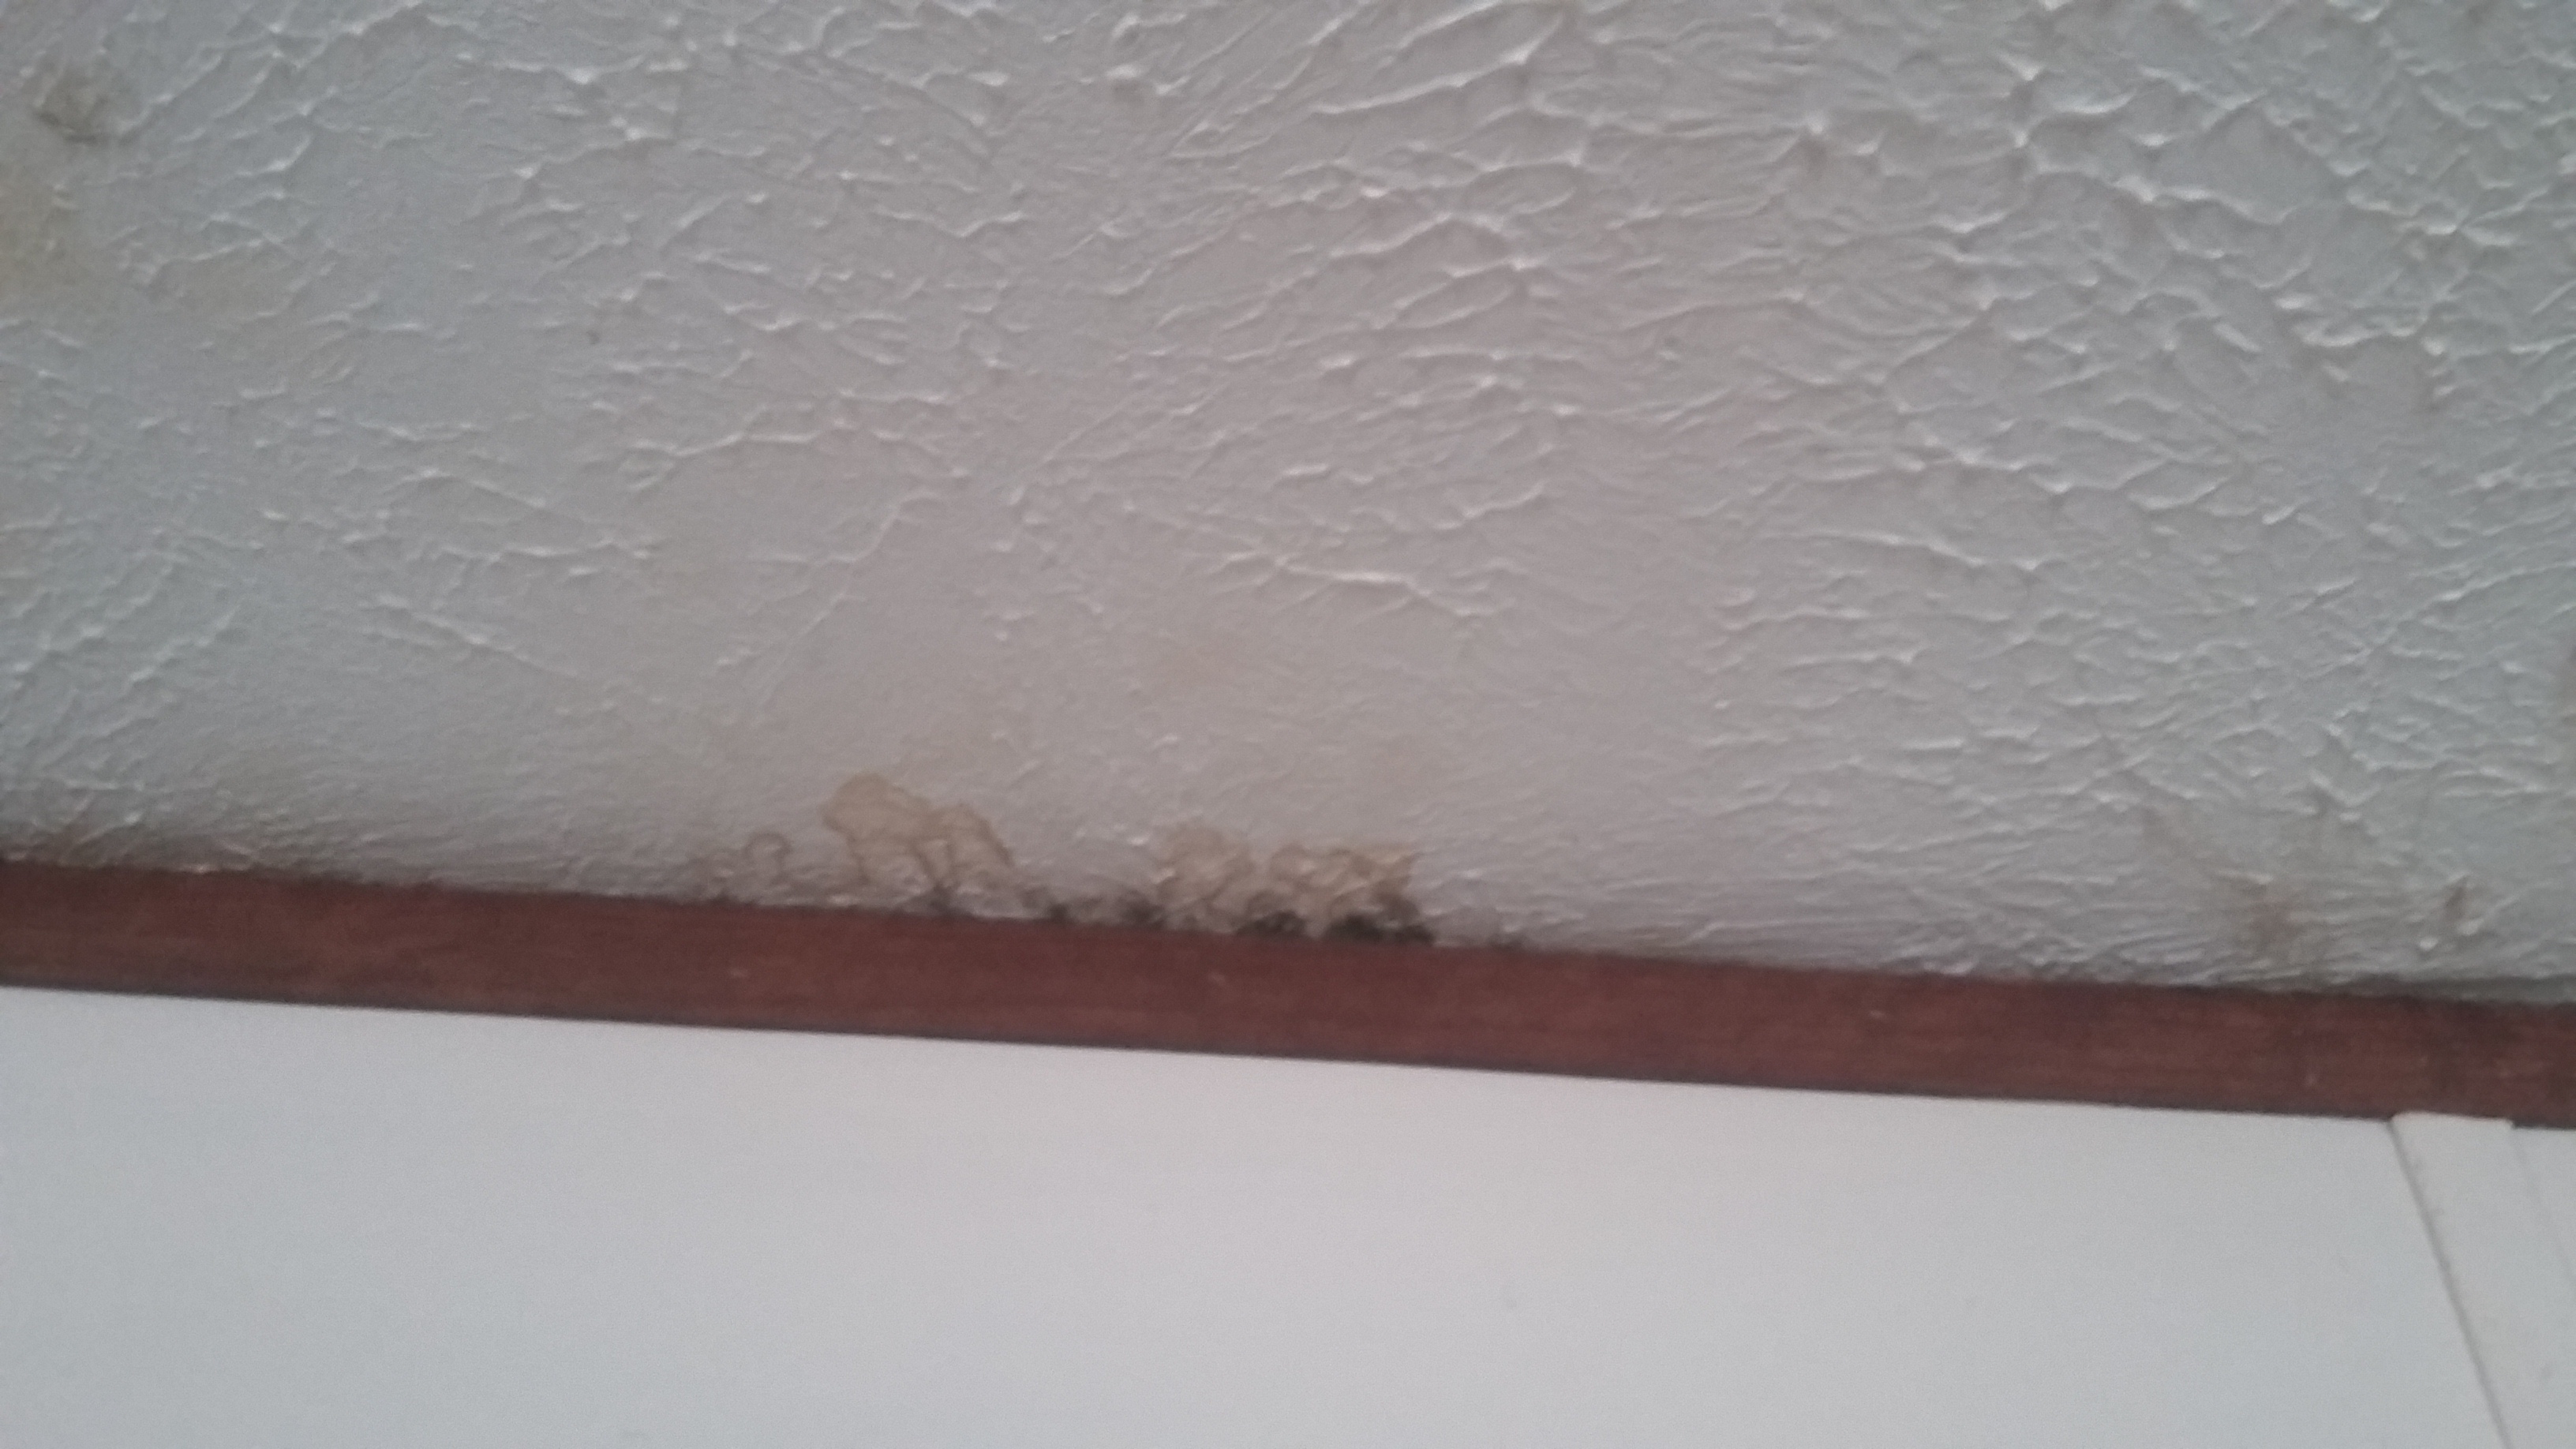 The mold keep in mind it's gotten worse over the 6 mnths and bow spreads along my whole ceiling wall line